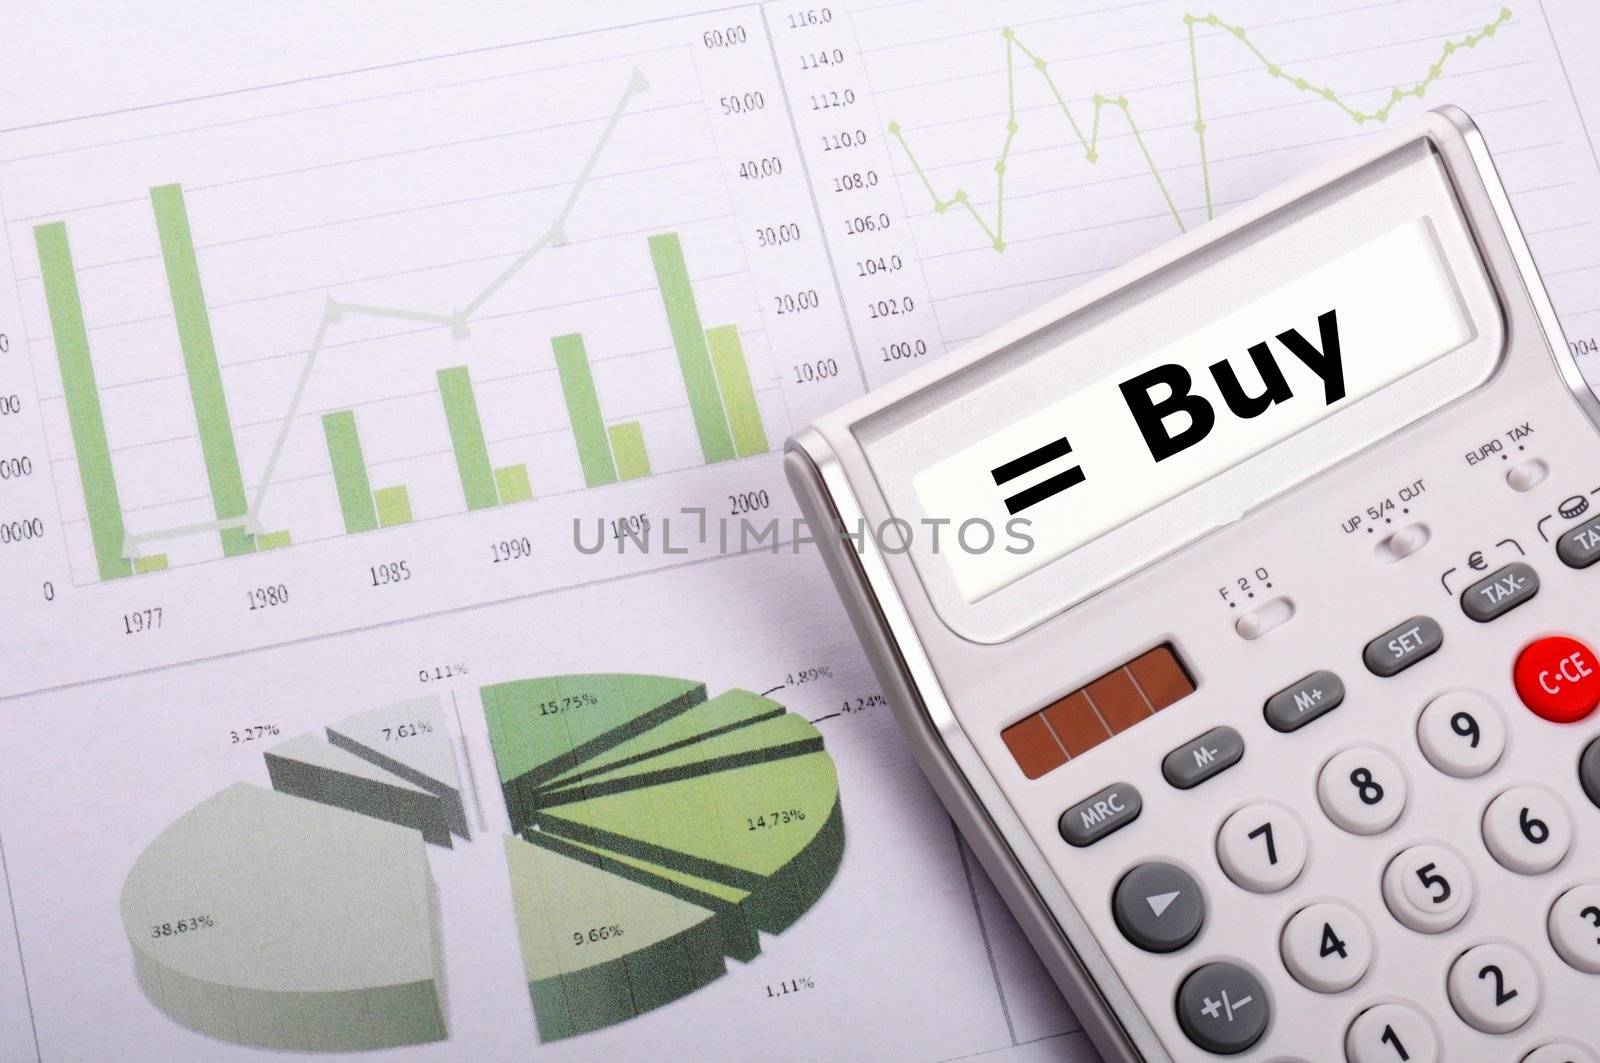 buy on calculator showing stock market or financial investment concept